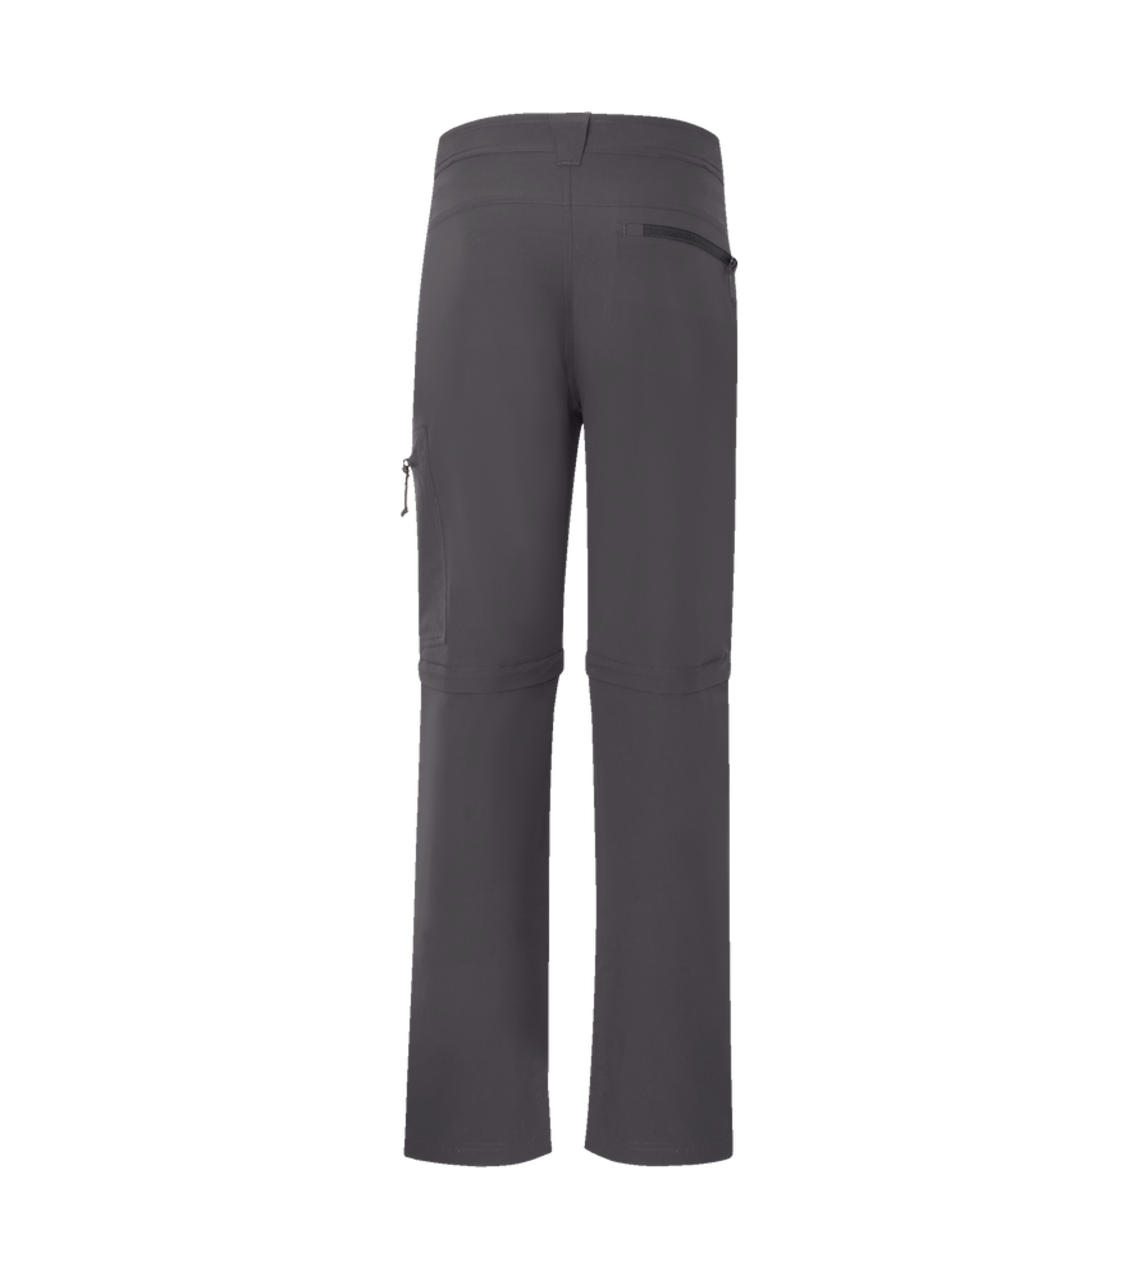 https://media-www.canadiantire.ca/product/playing/footwear-apparel/summer-footwear-apparel/1873573/kamik-men-s-zip-off-adventure-pant-size-small-e4a339b3-0858-4e09-9099-7c1d51aca55e.png?imdensity=1&imwidth=1244&impolicy=mZoom